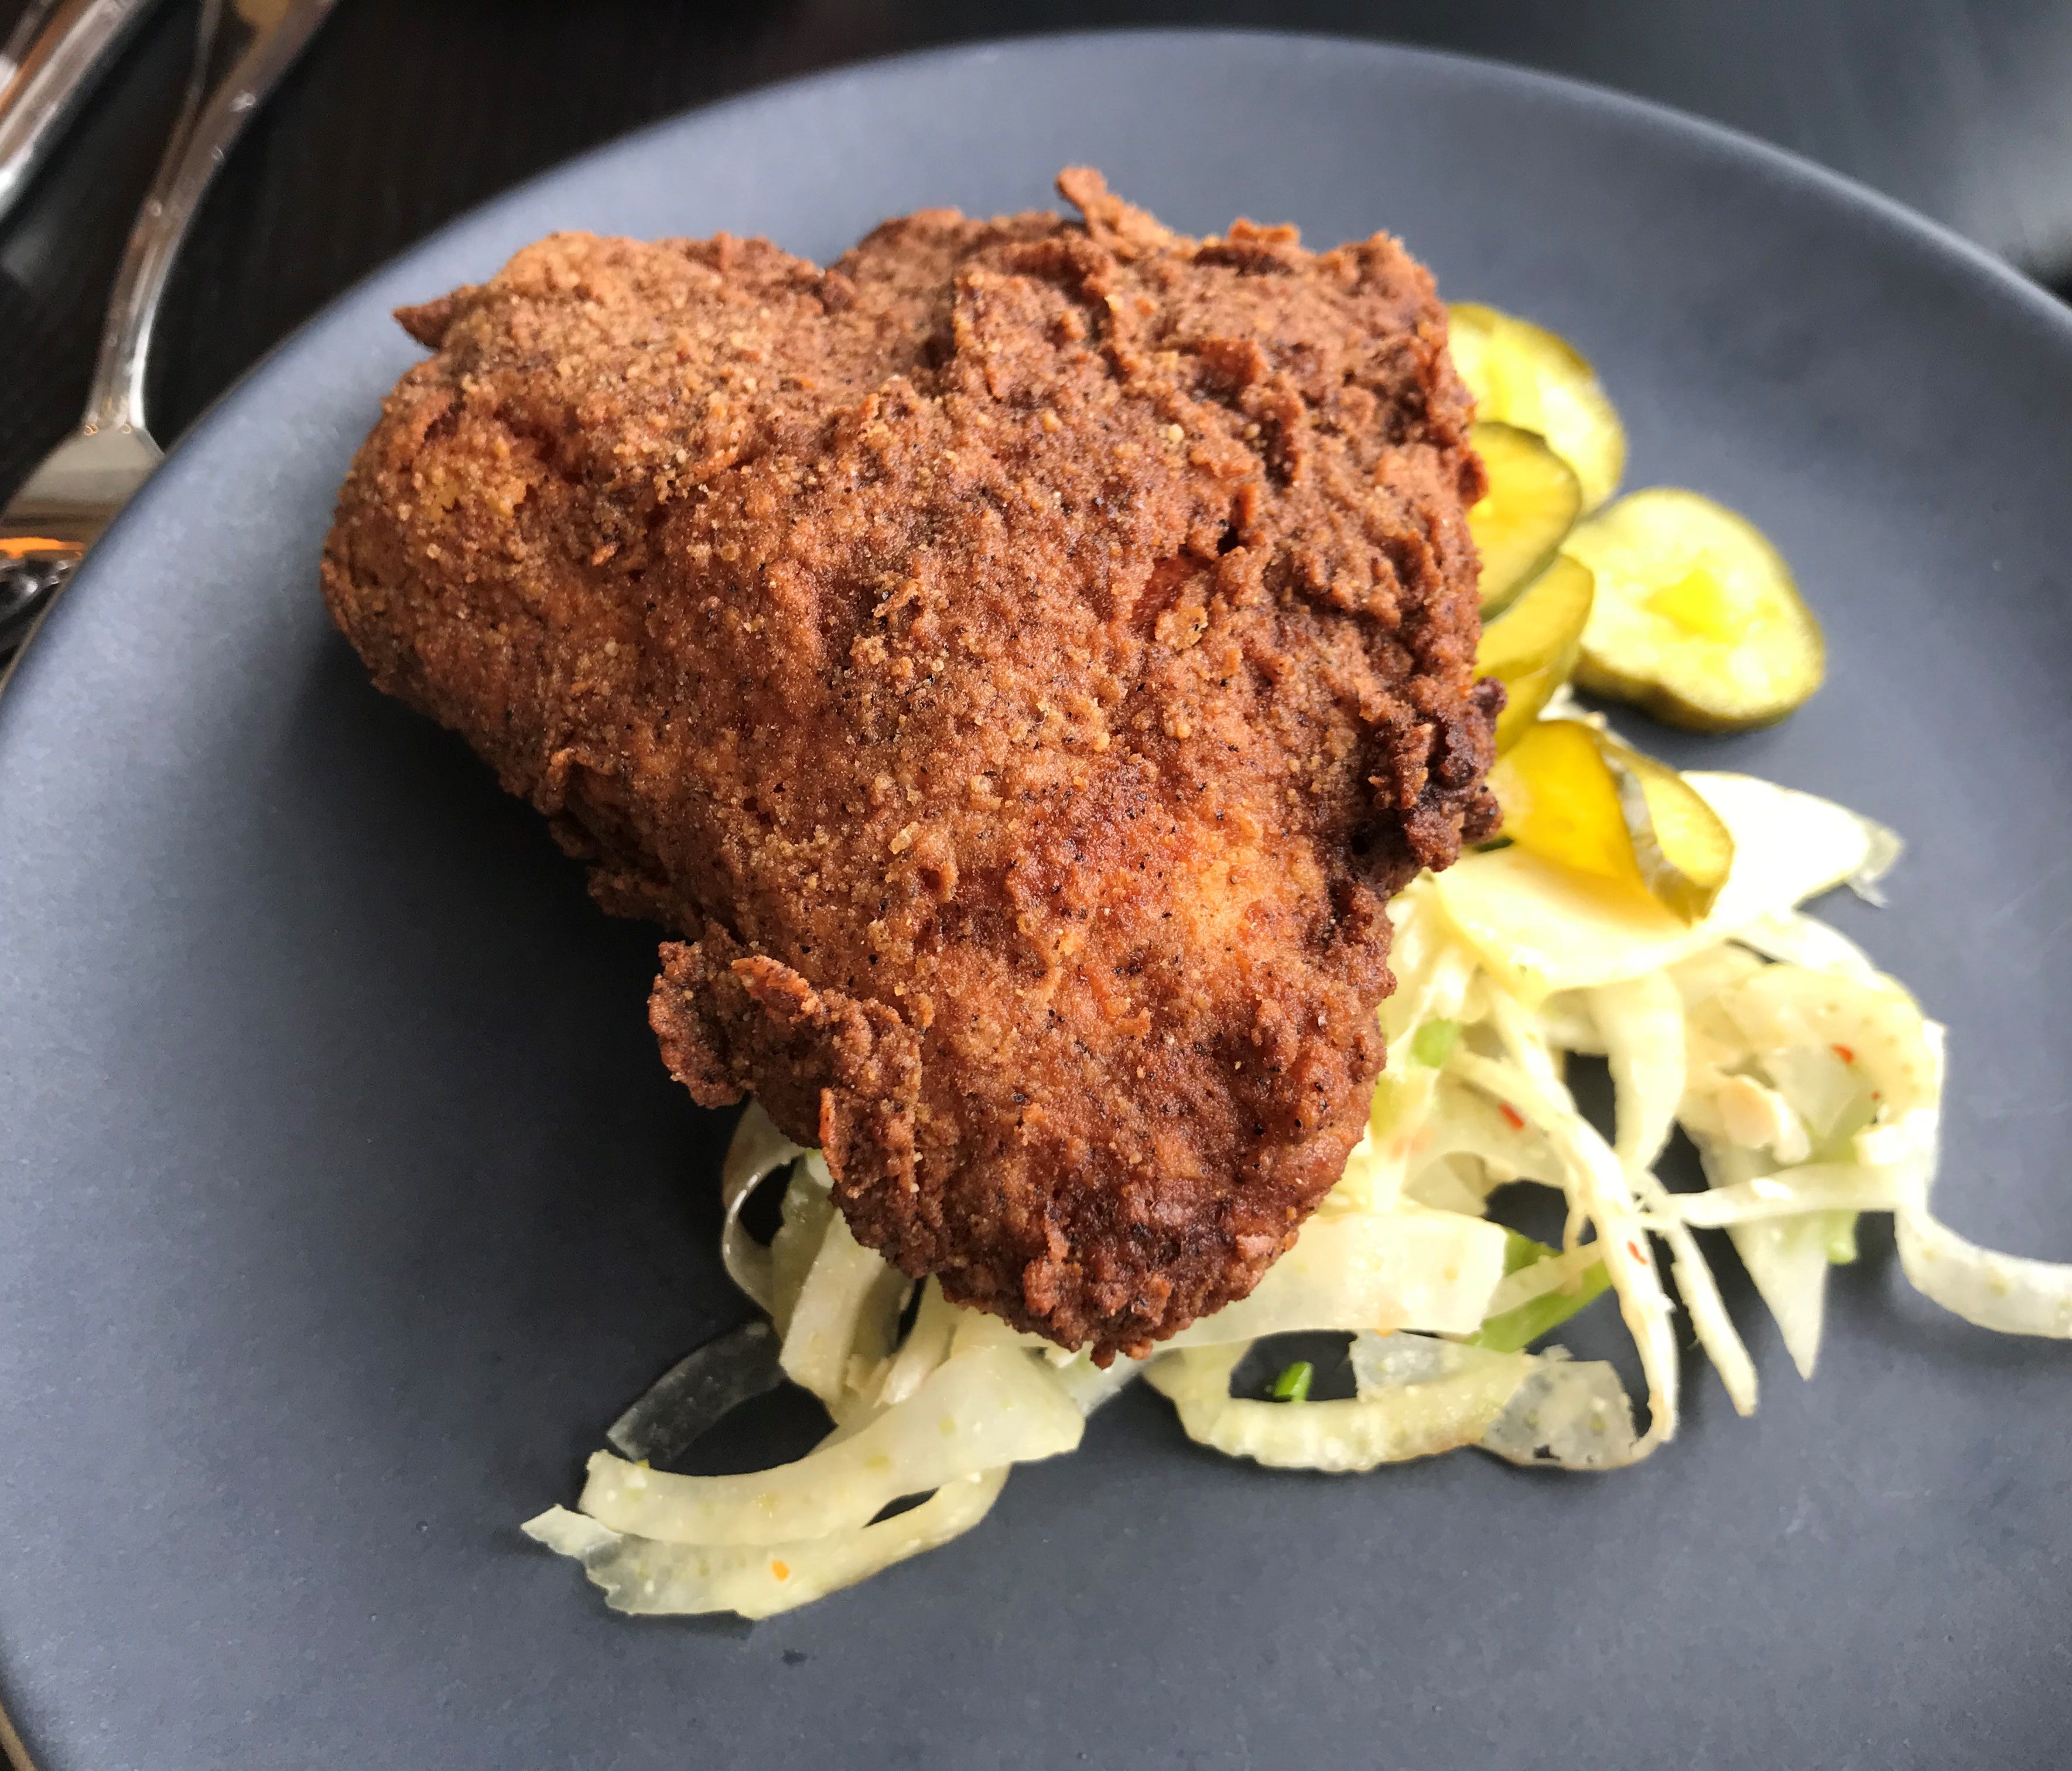 A fried chicken breast is served with house-made pickles and chunky coleslaw.